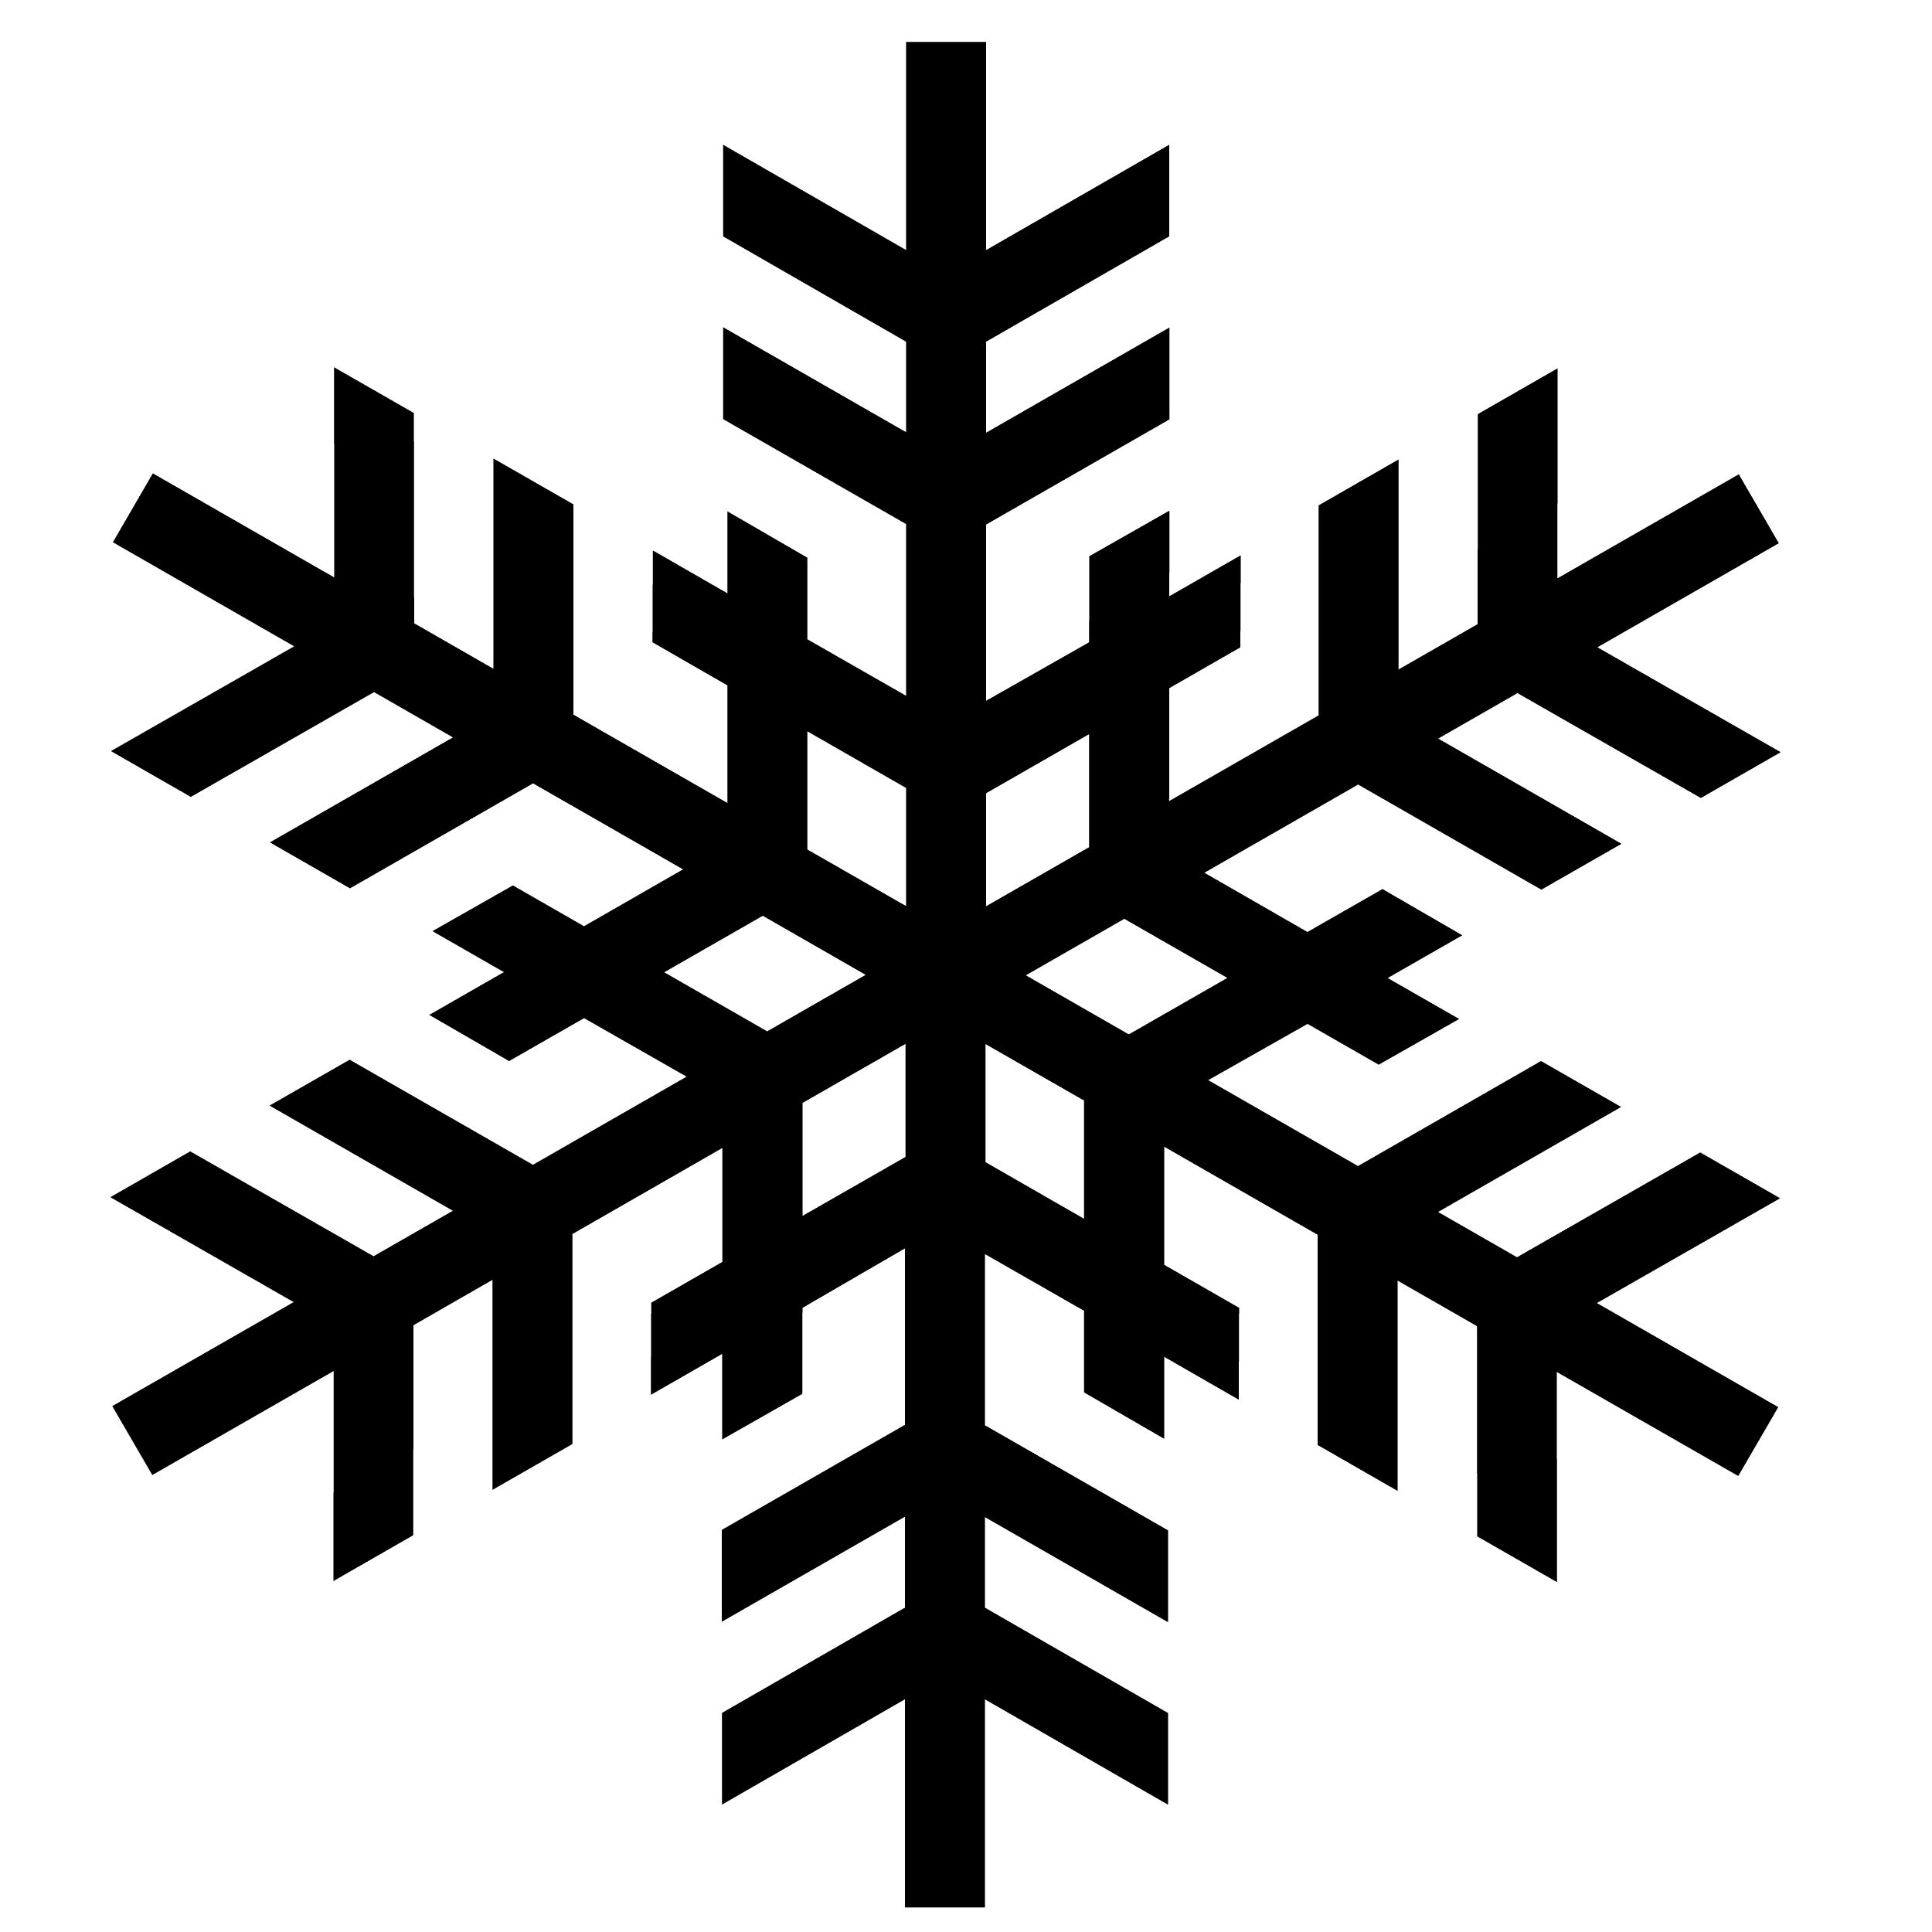 Snowflakes Silhouette Clip Art Vector Online Royalty Free on ...